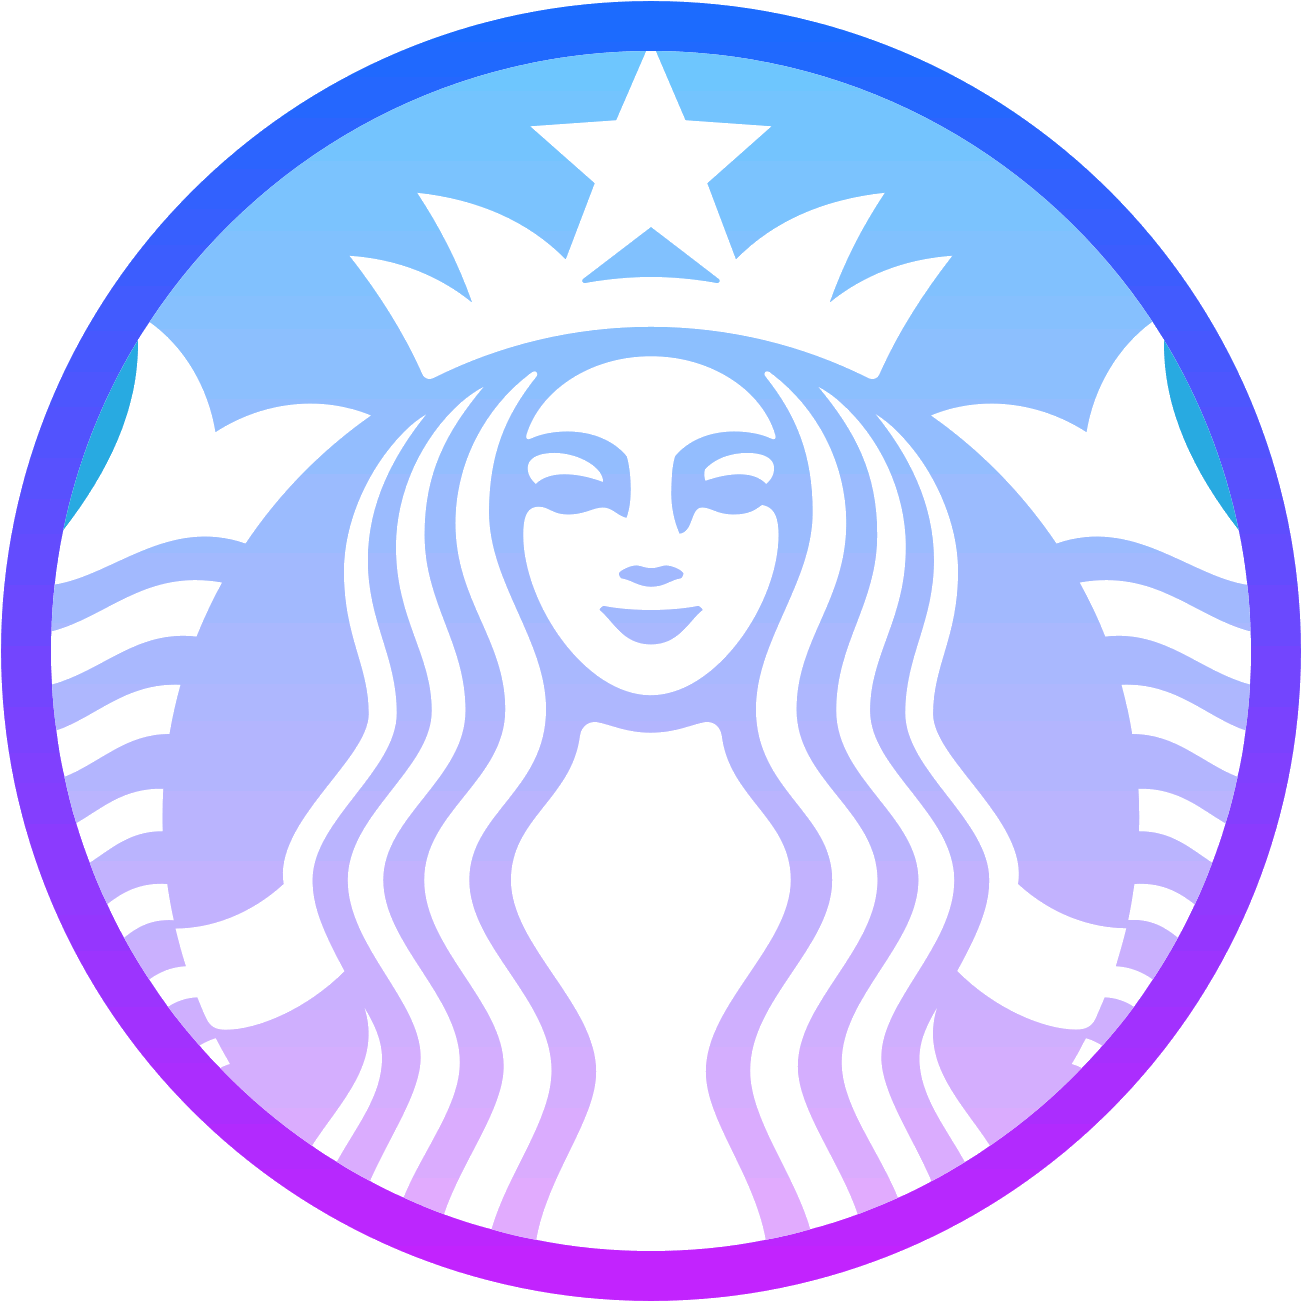 Download and share clipart about Starbucks Logo Vector Png The Best Of - St...